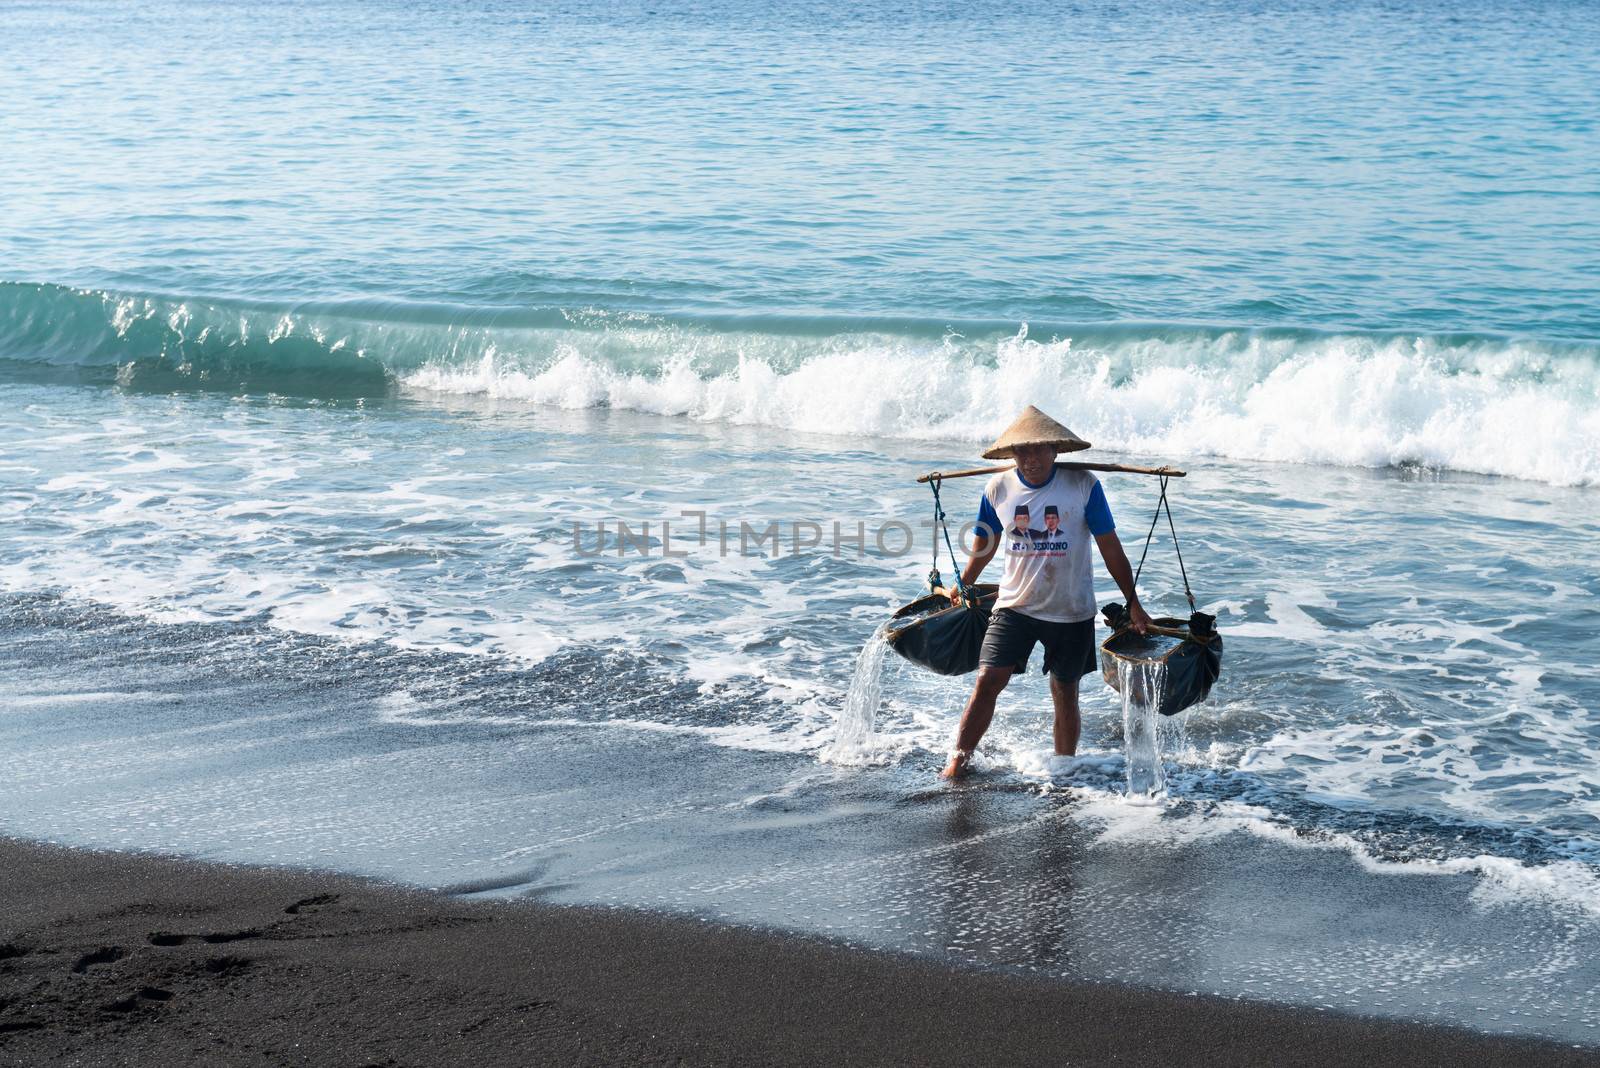 BALI - SEP 26: Manual male worker collects water for sea salt production on Sep 26, 2012 in Amuk Bay, Bali. It is unique tradition of salt production on volcanic sand dating back over 900 years. 